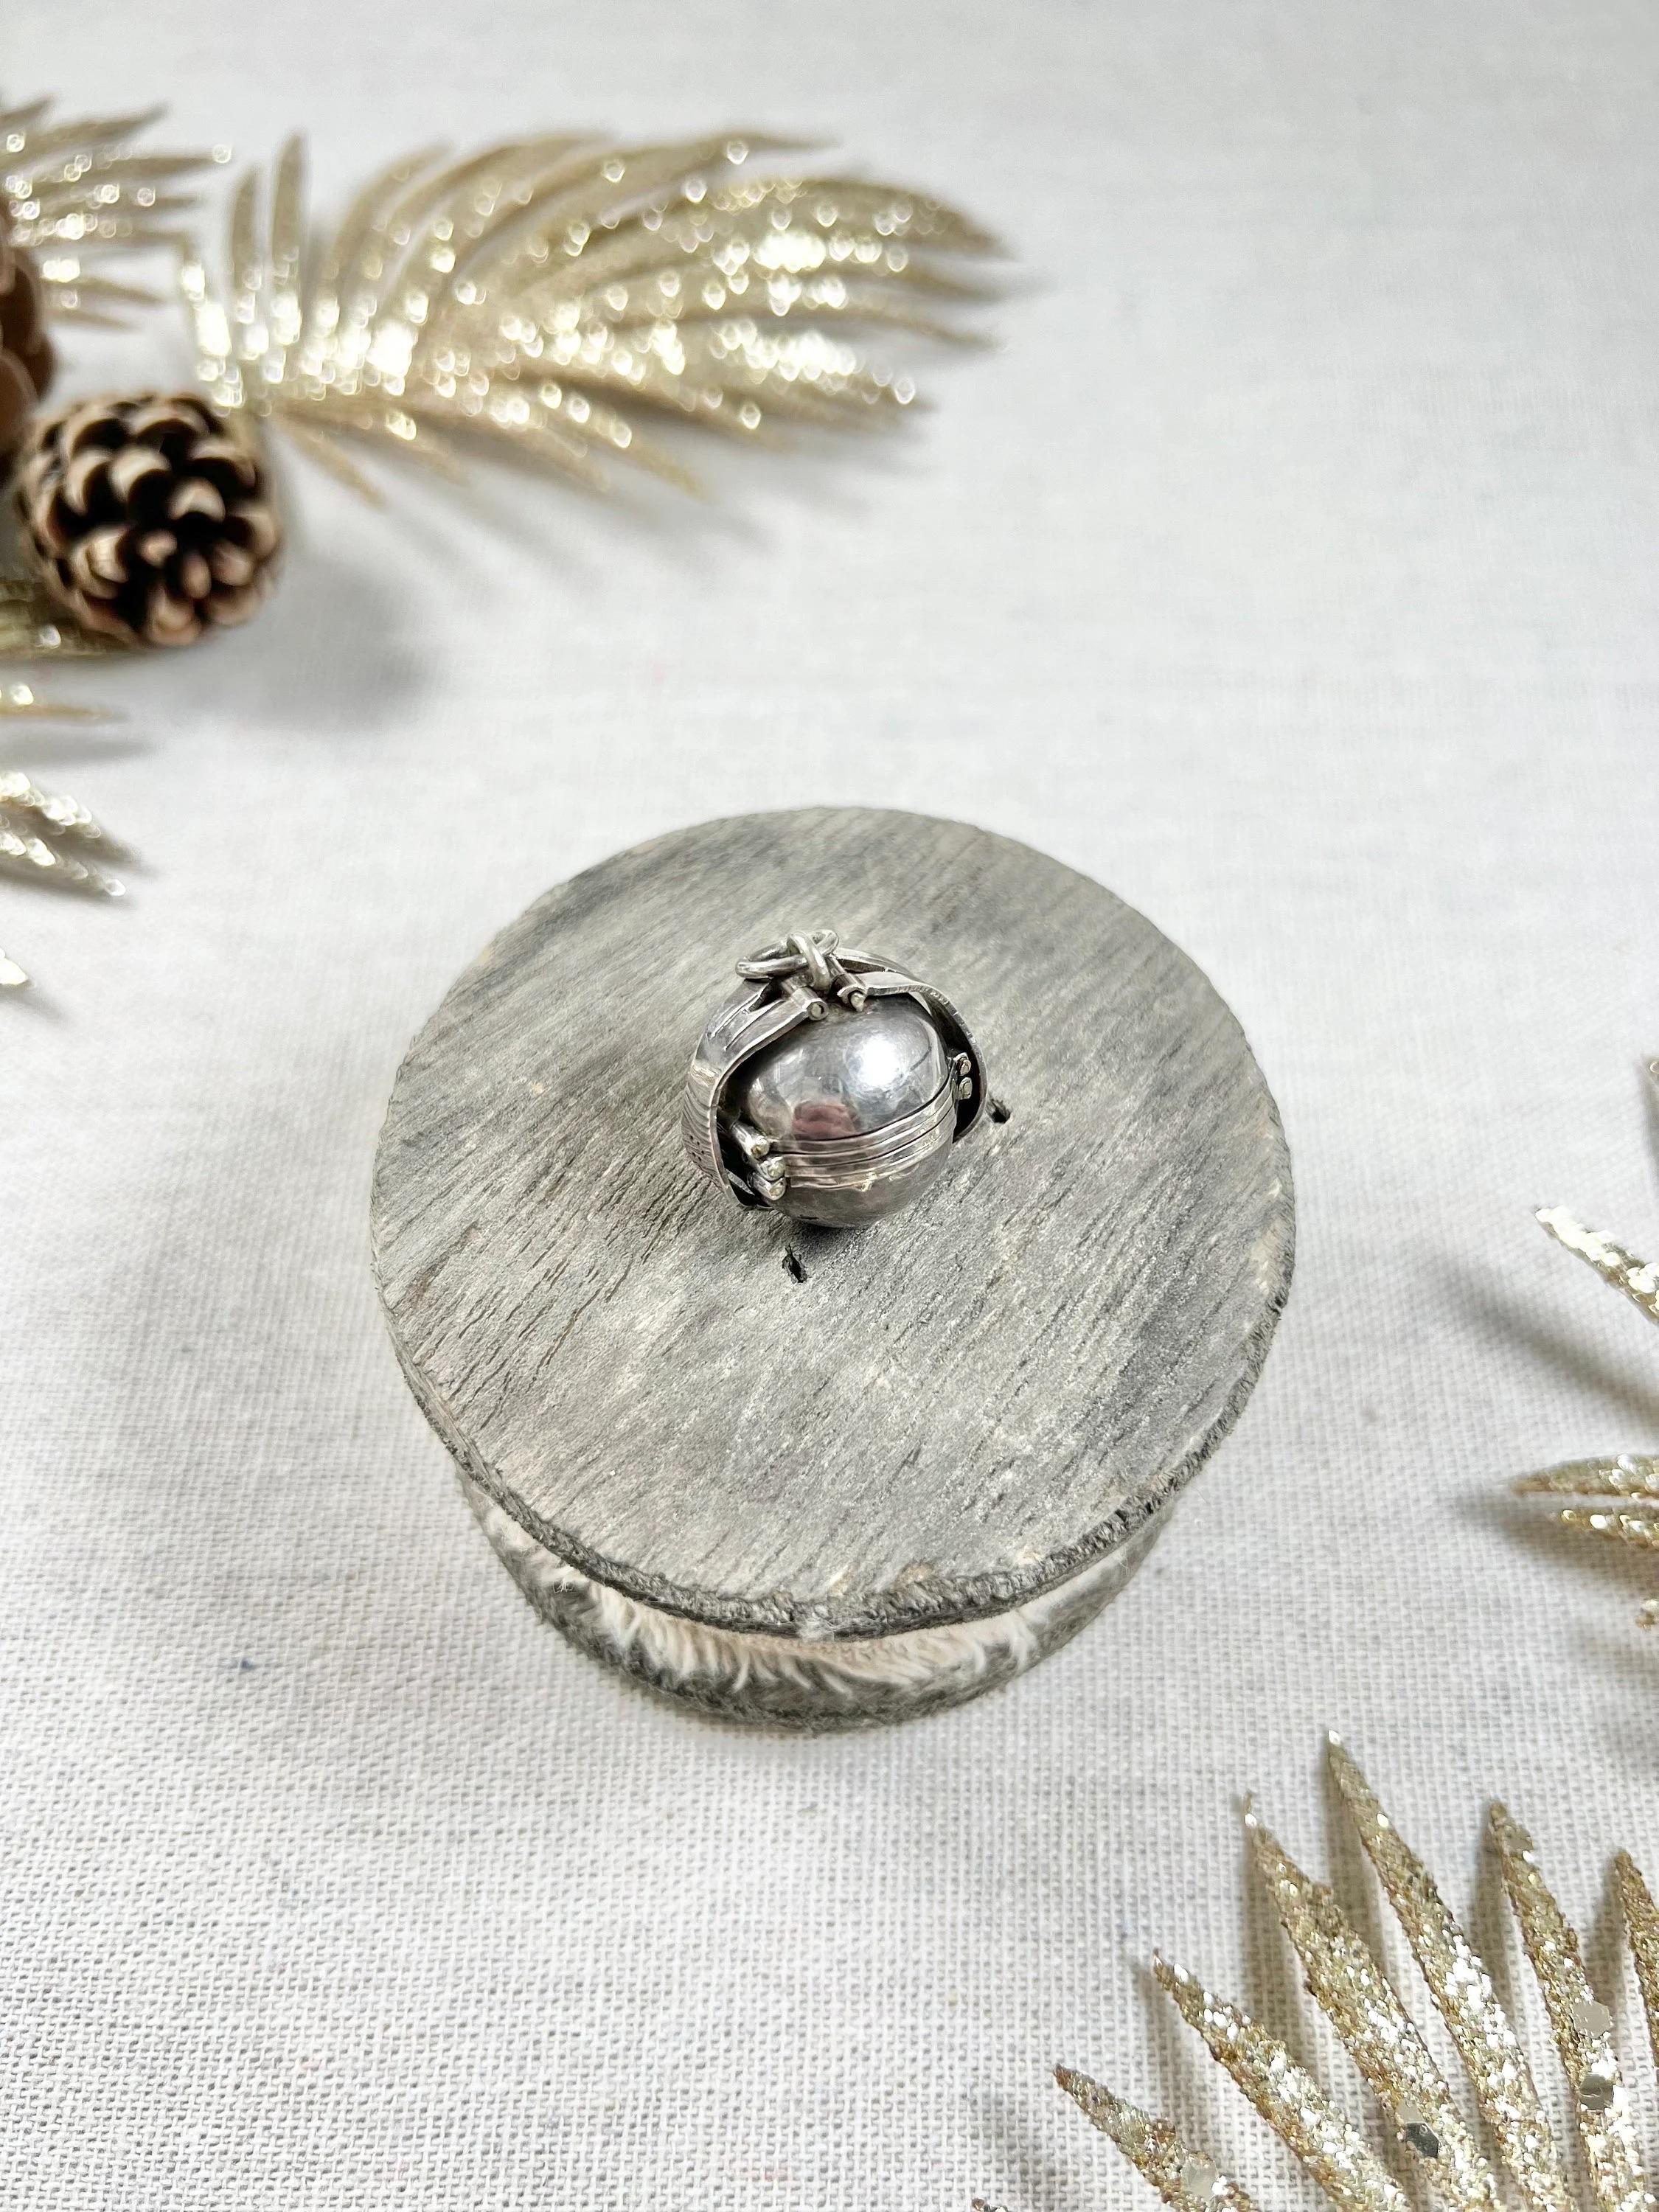 Vintage Silver Locket

Sterling Silver 925 Stamped

Circa 1950s

This vintage family locket from the 1950s is a true piece of art. Made of sterling silver and stamped with 925, it features a stunning orb design with a pair of gullwing clasps that